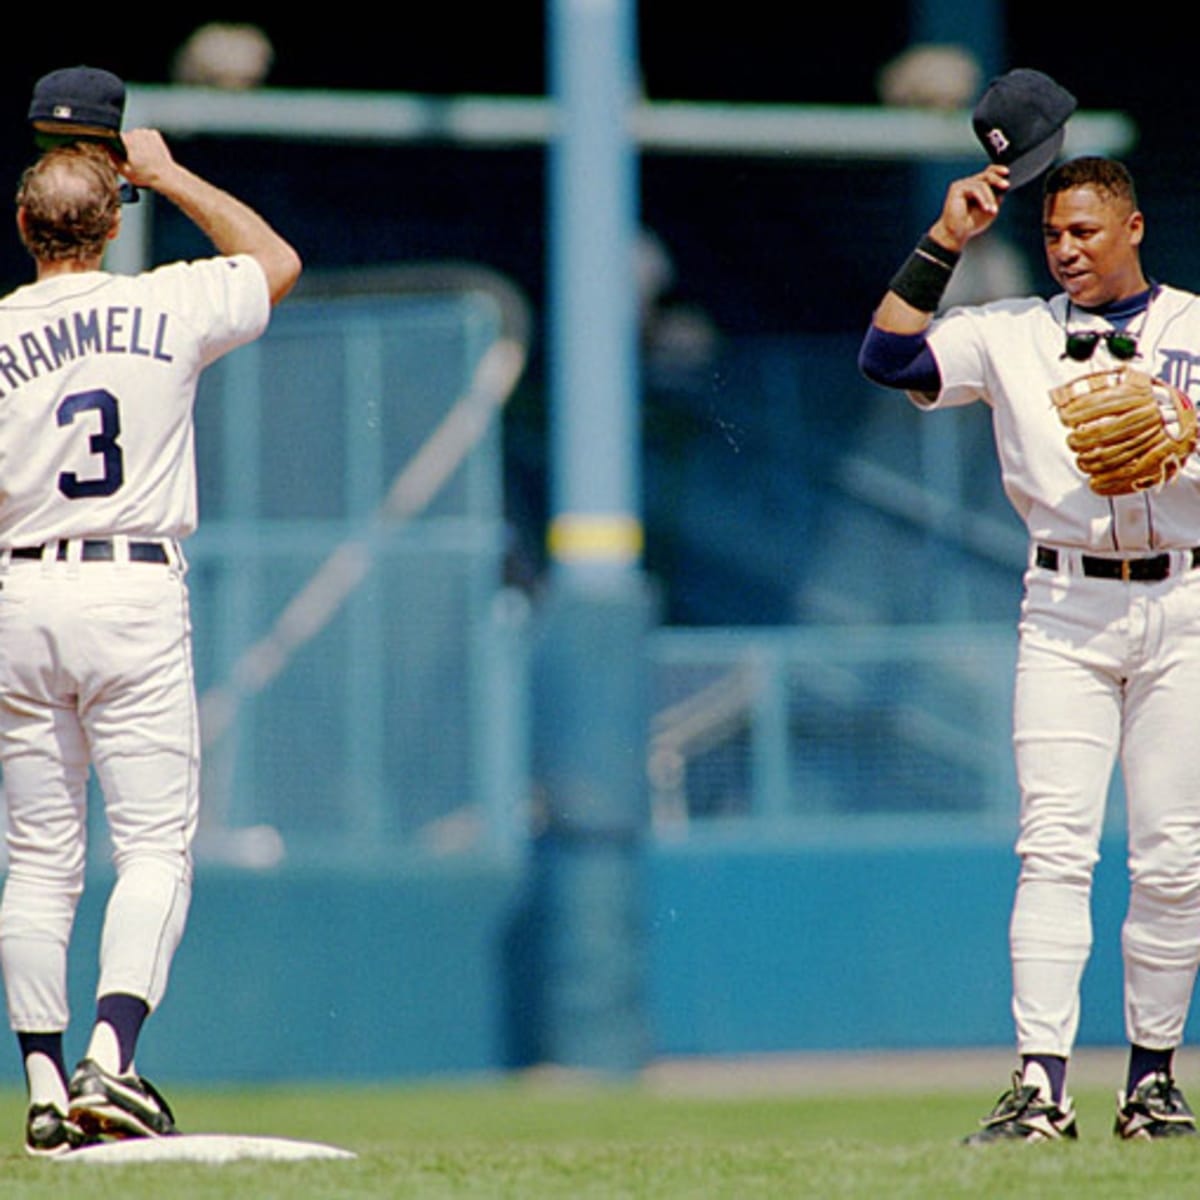 Alan Trammell hoping to go into Hall of Fame with Lou Whitaker - Sports  Illustrated